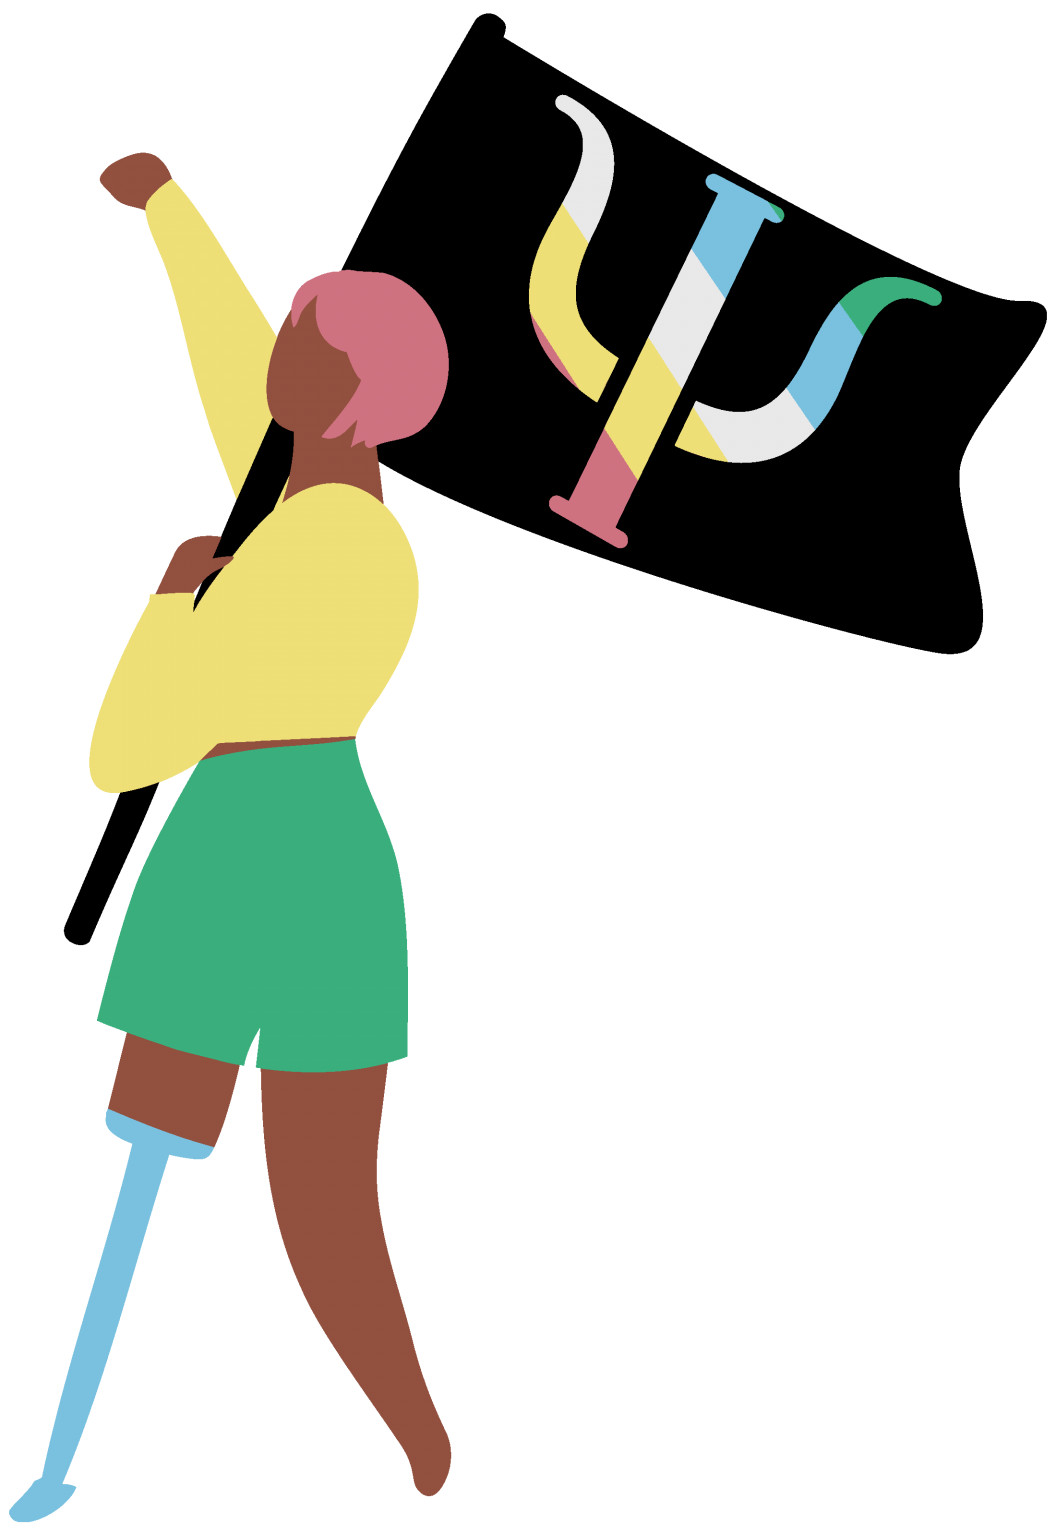 The DARN logo is a person proudly waving a flag with their fist upraised. They have pink hair, brown skin, a yellow sweater, green shorts, and a blue prosthetic leg, each representing a color in the flag. The flag is black with a Psi symbol containing five colors, which represent a variety of needs and experiences: Mental Illness, Intellectual and Developmental Disabilities, Invisible and Undiagnosed Disabilities, Physical Disabilities, and Sensory Disabilities.